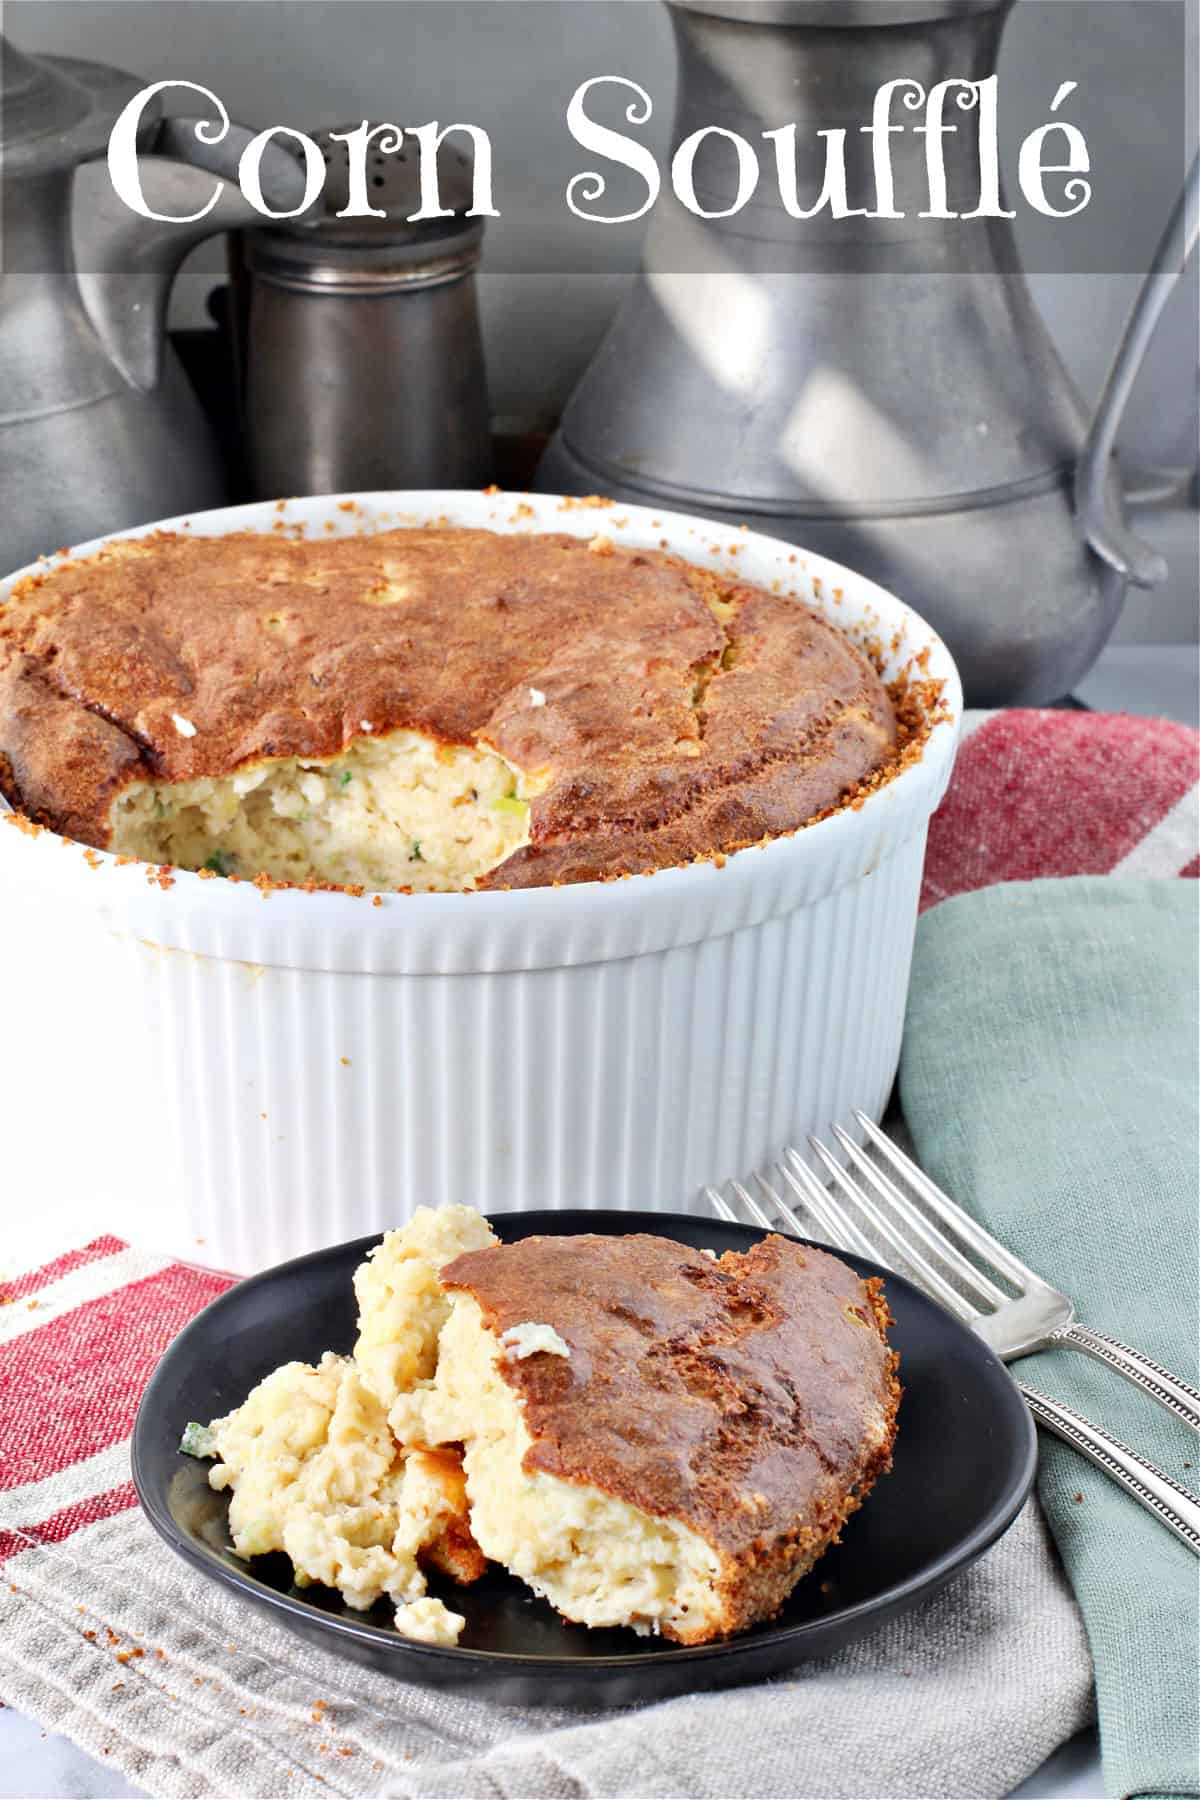 Corn Soufflé in the dish with a plate in front with one serving.